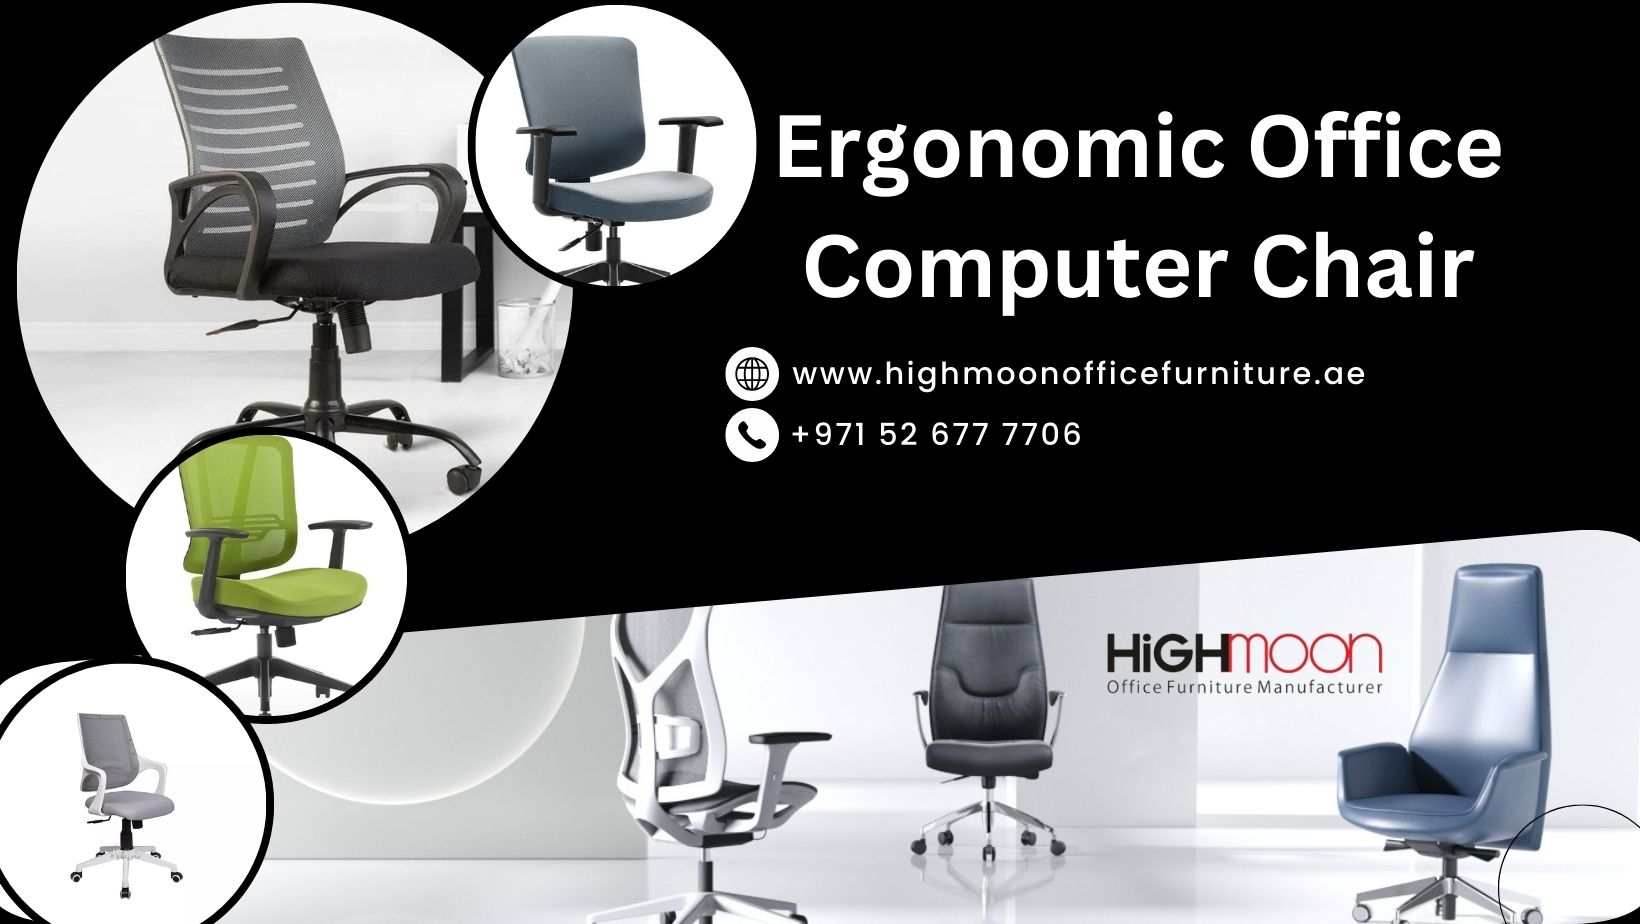 High Quality Ergonomic Office Computer Chair for Sale in Dubai